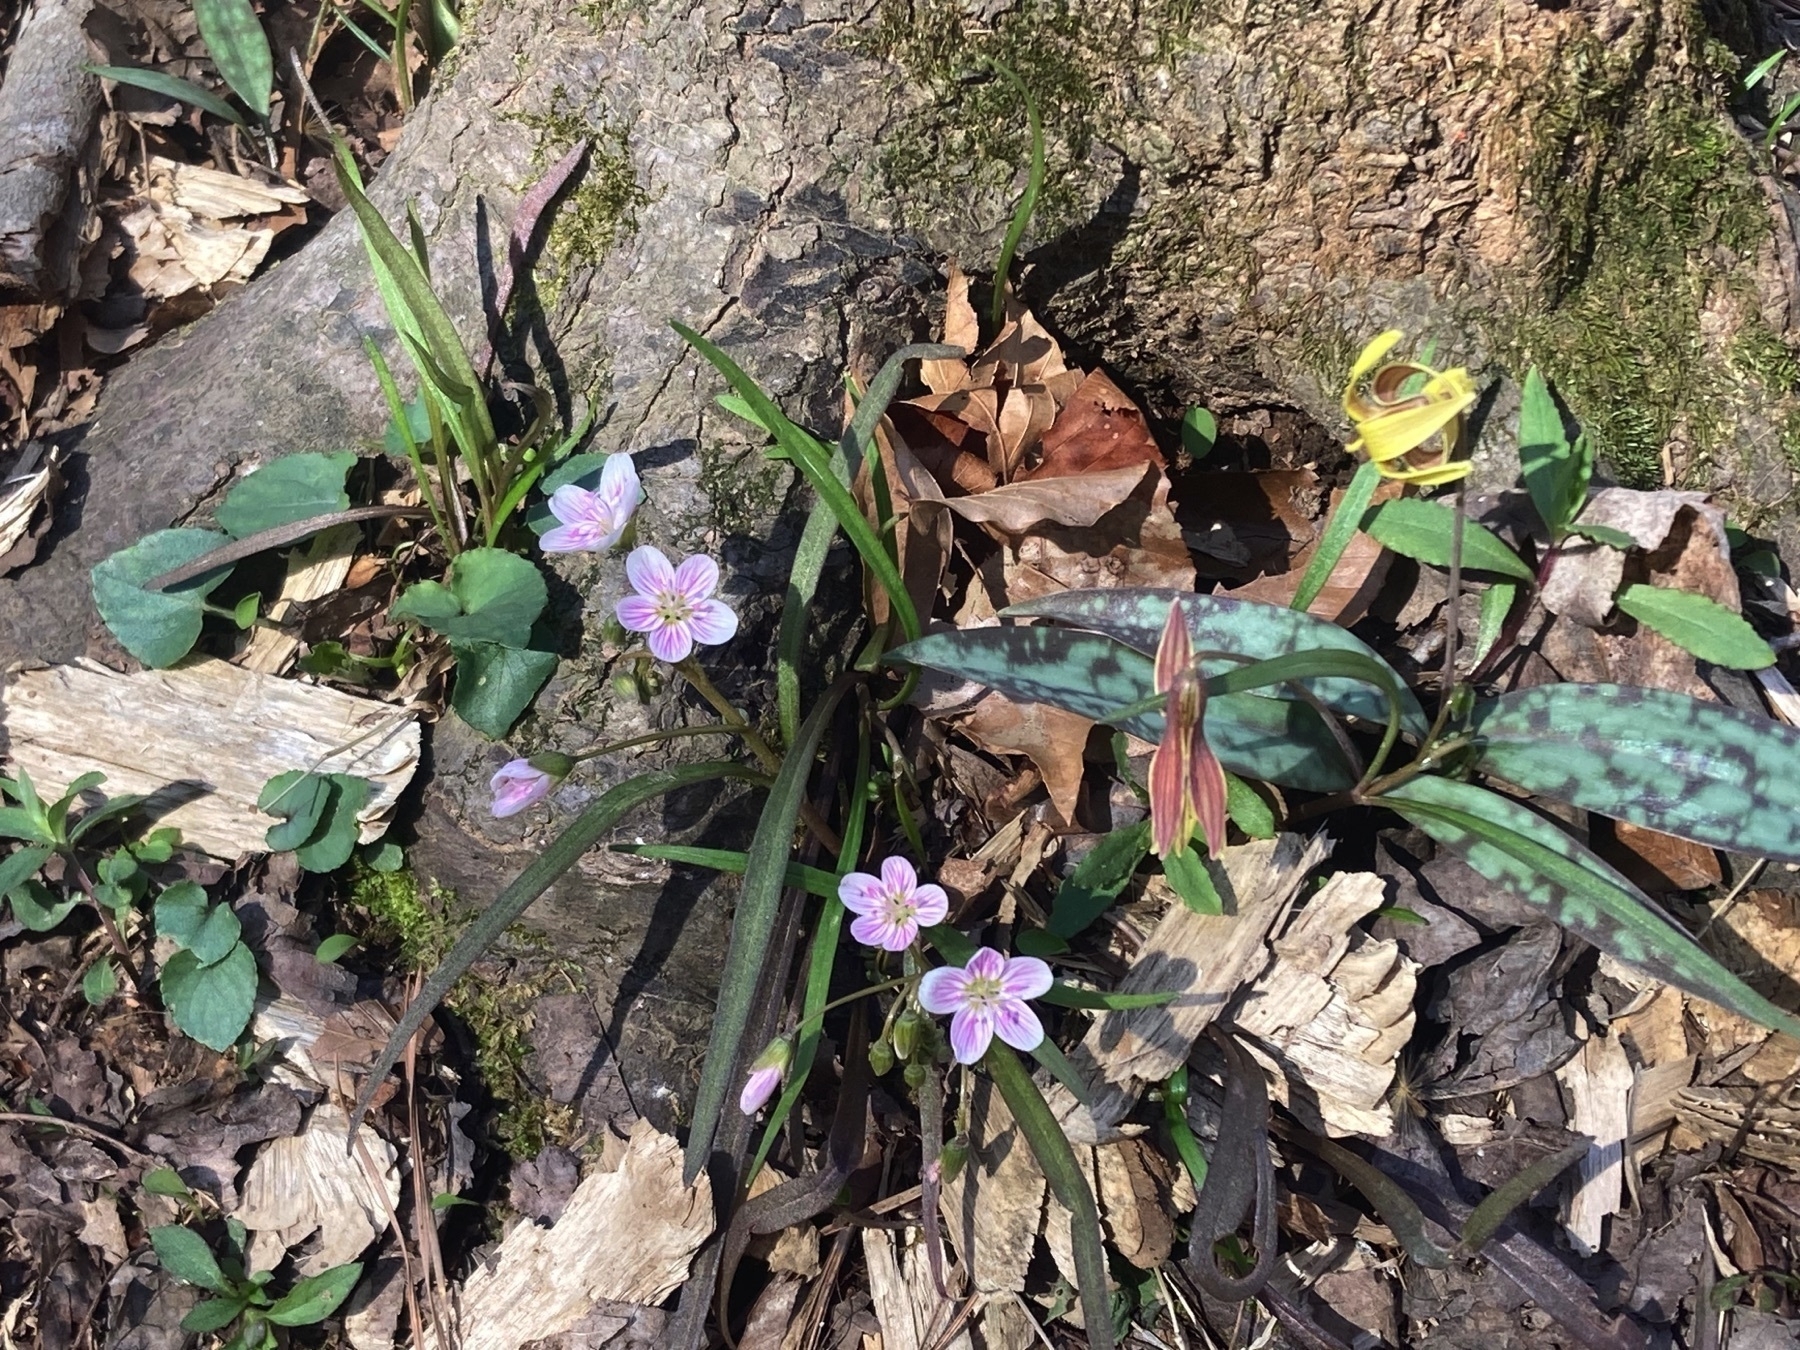 trout lilies and sping beauties blooming at the base of a tree (actually only a stump, which you can’t tell from the photo—but now YOU know, ha ha!)